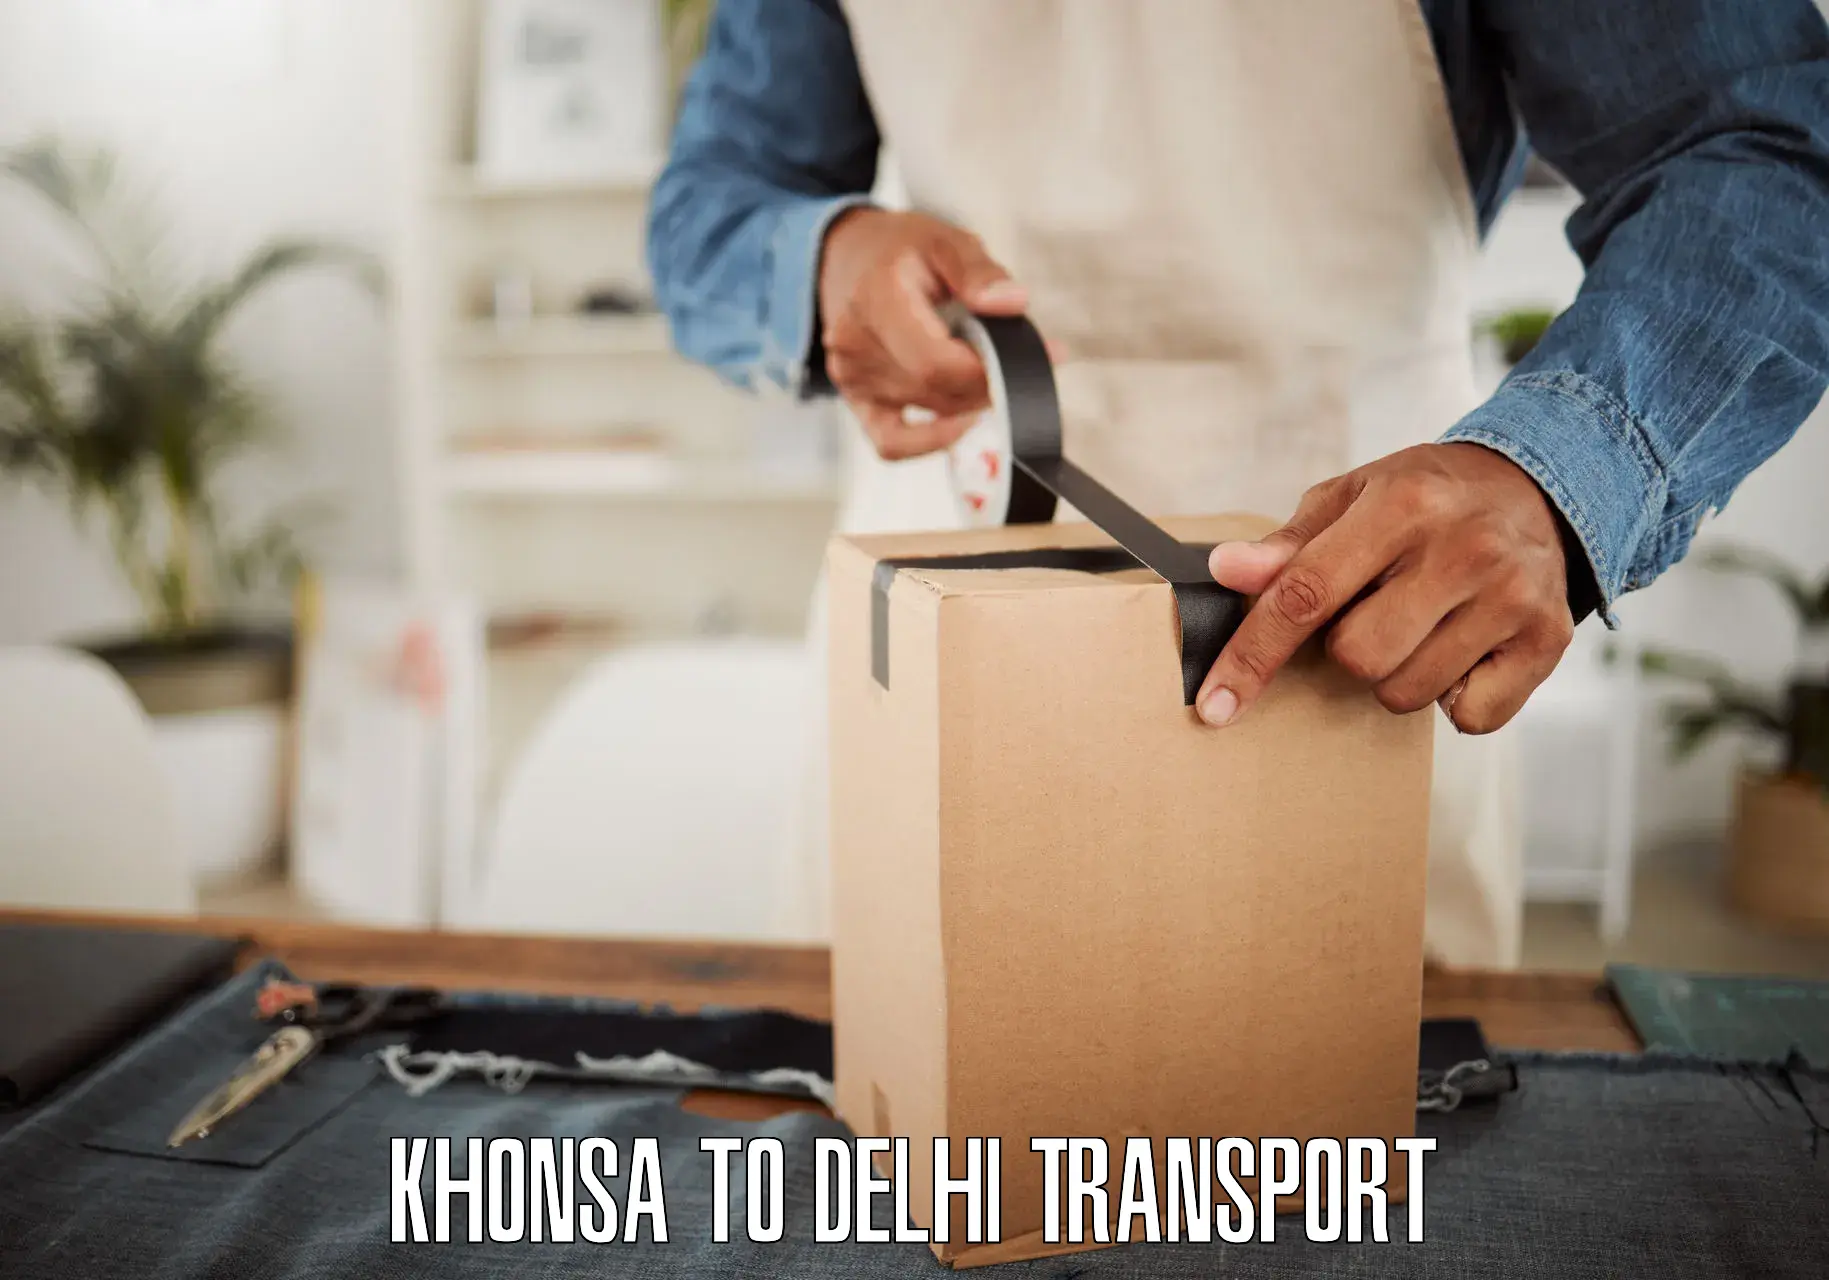 Cargo train transport services in Khonsa to NCR